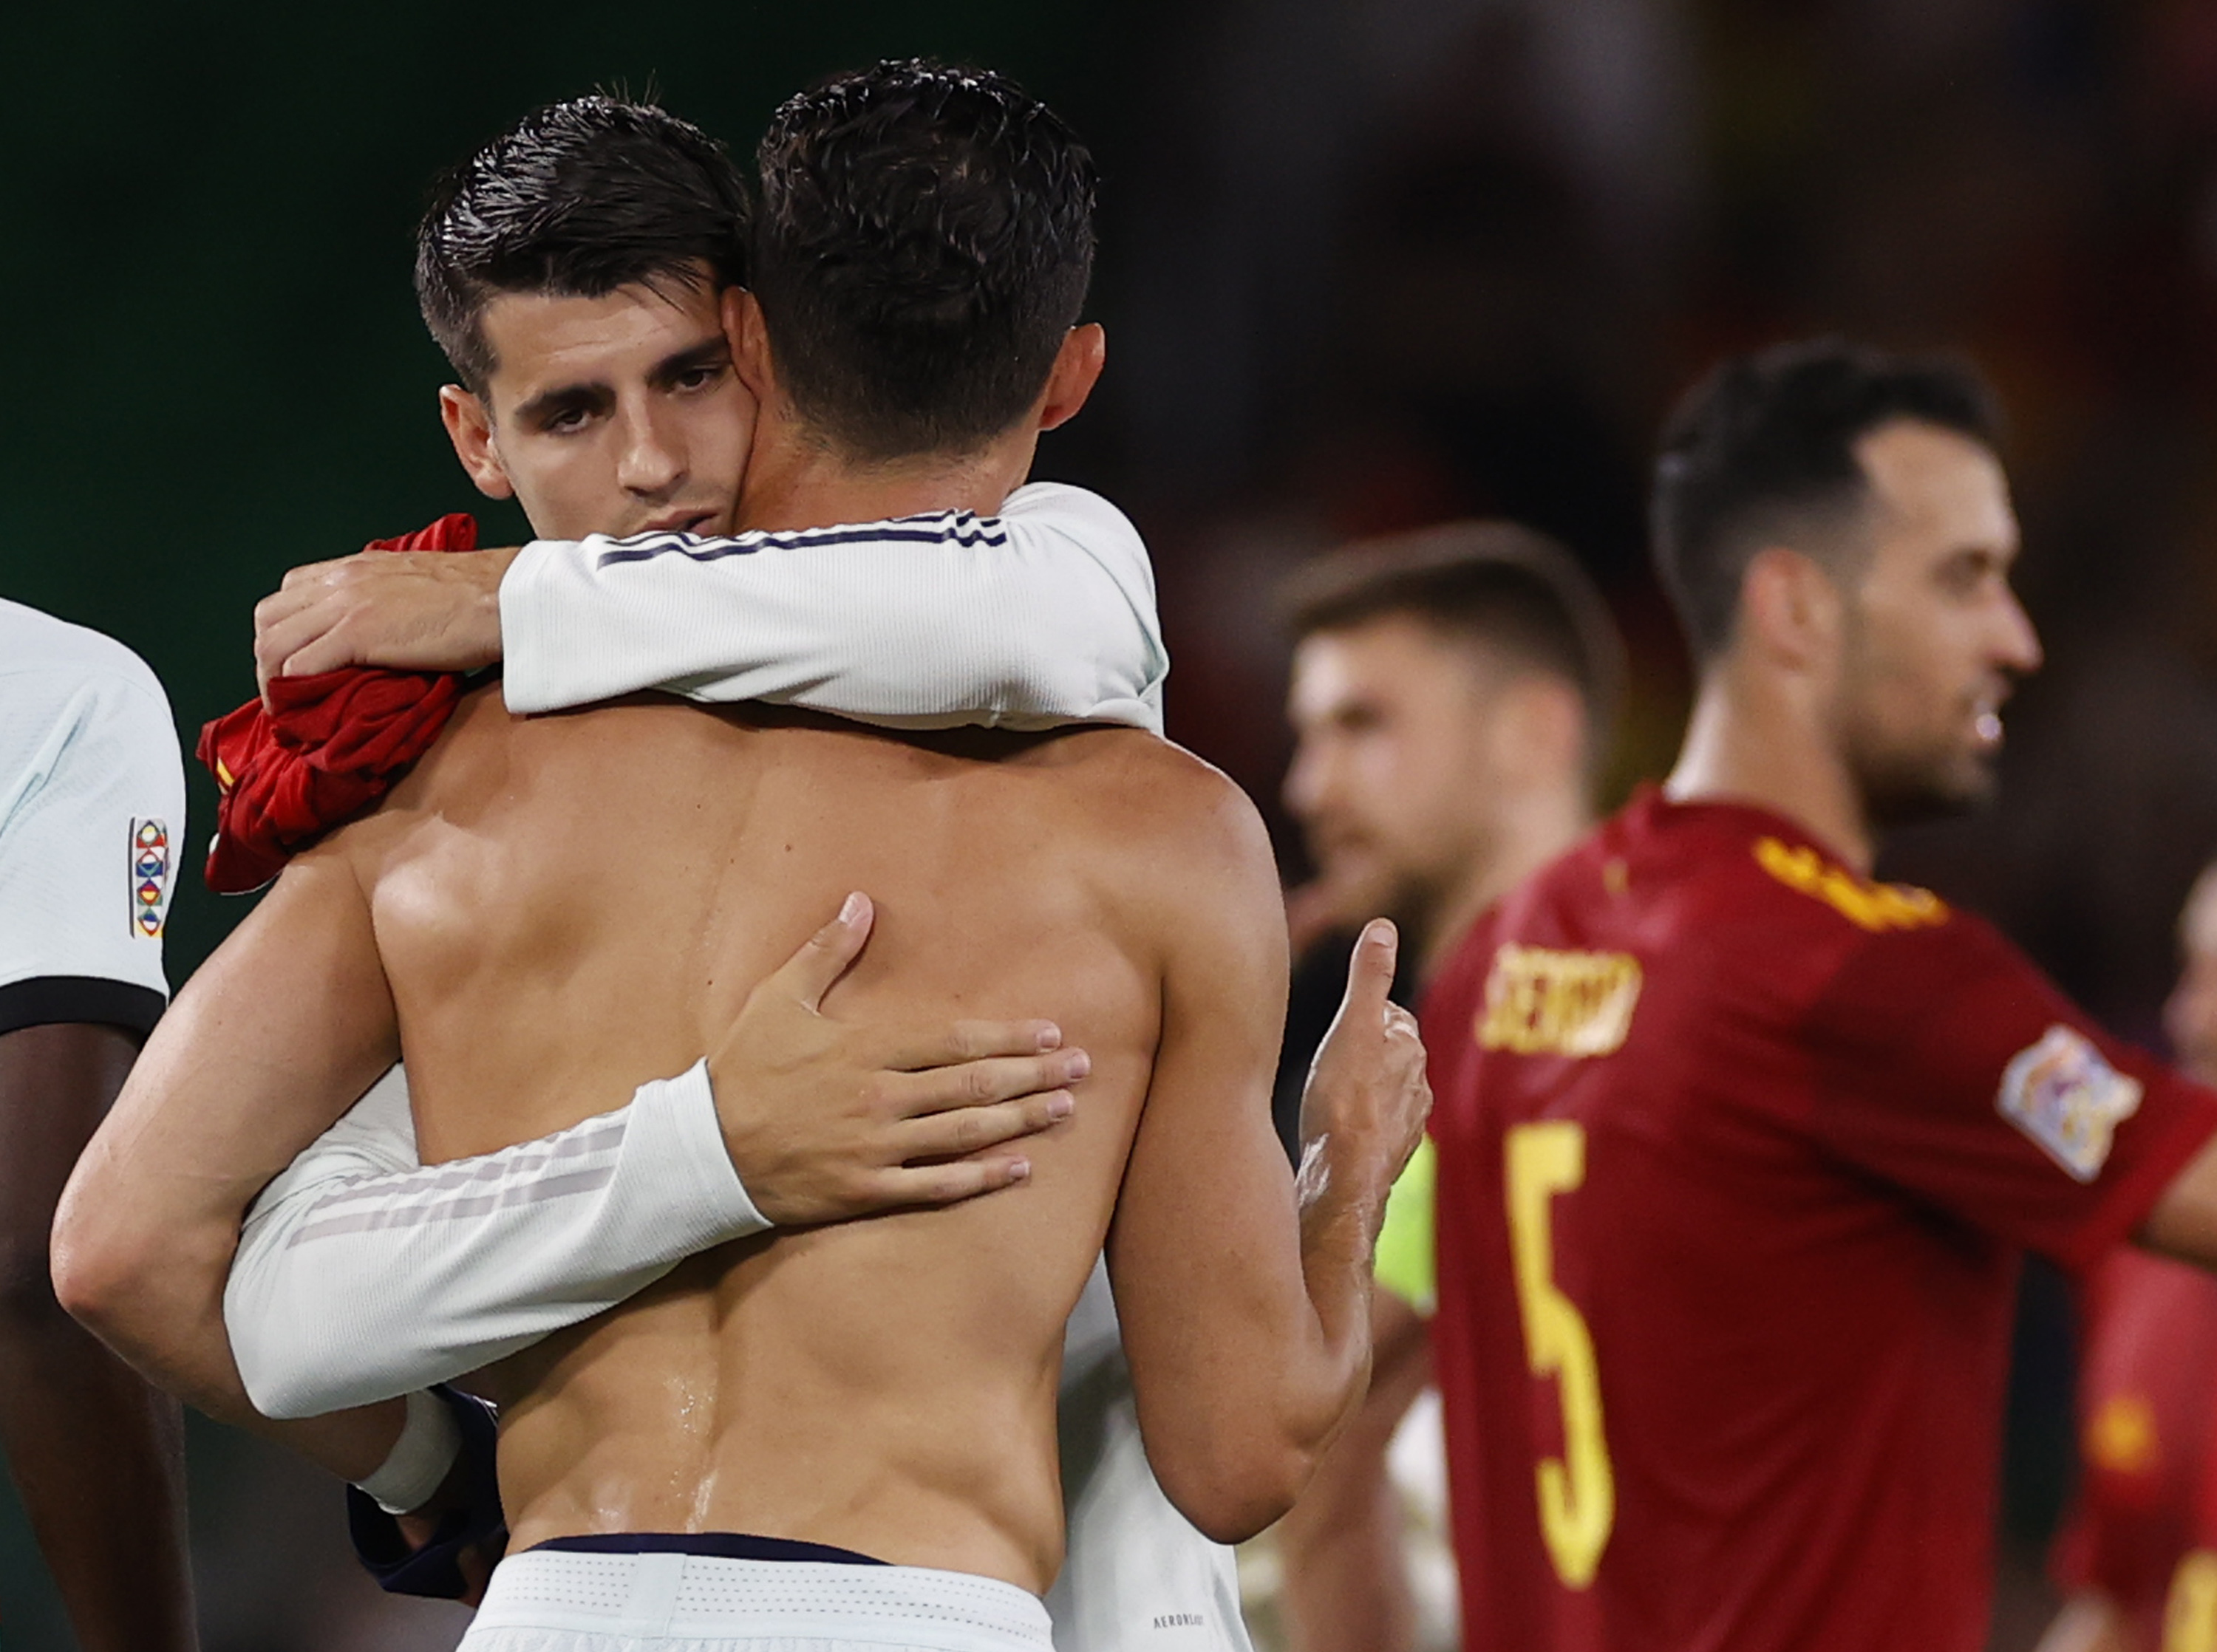 Morata hugged Cristiano after the game.